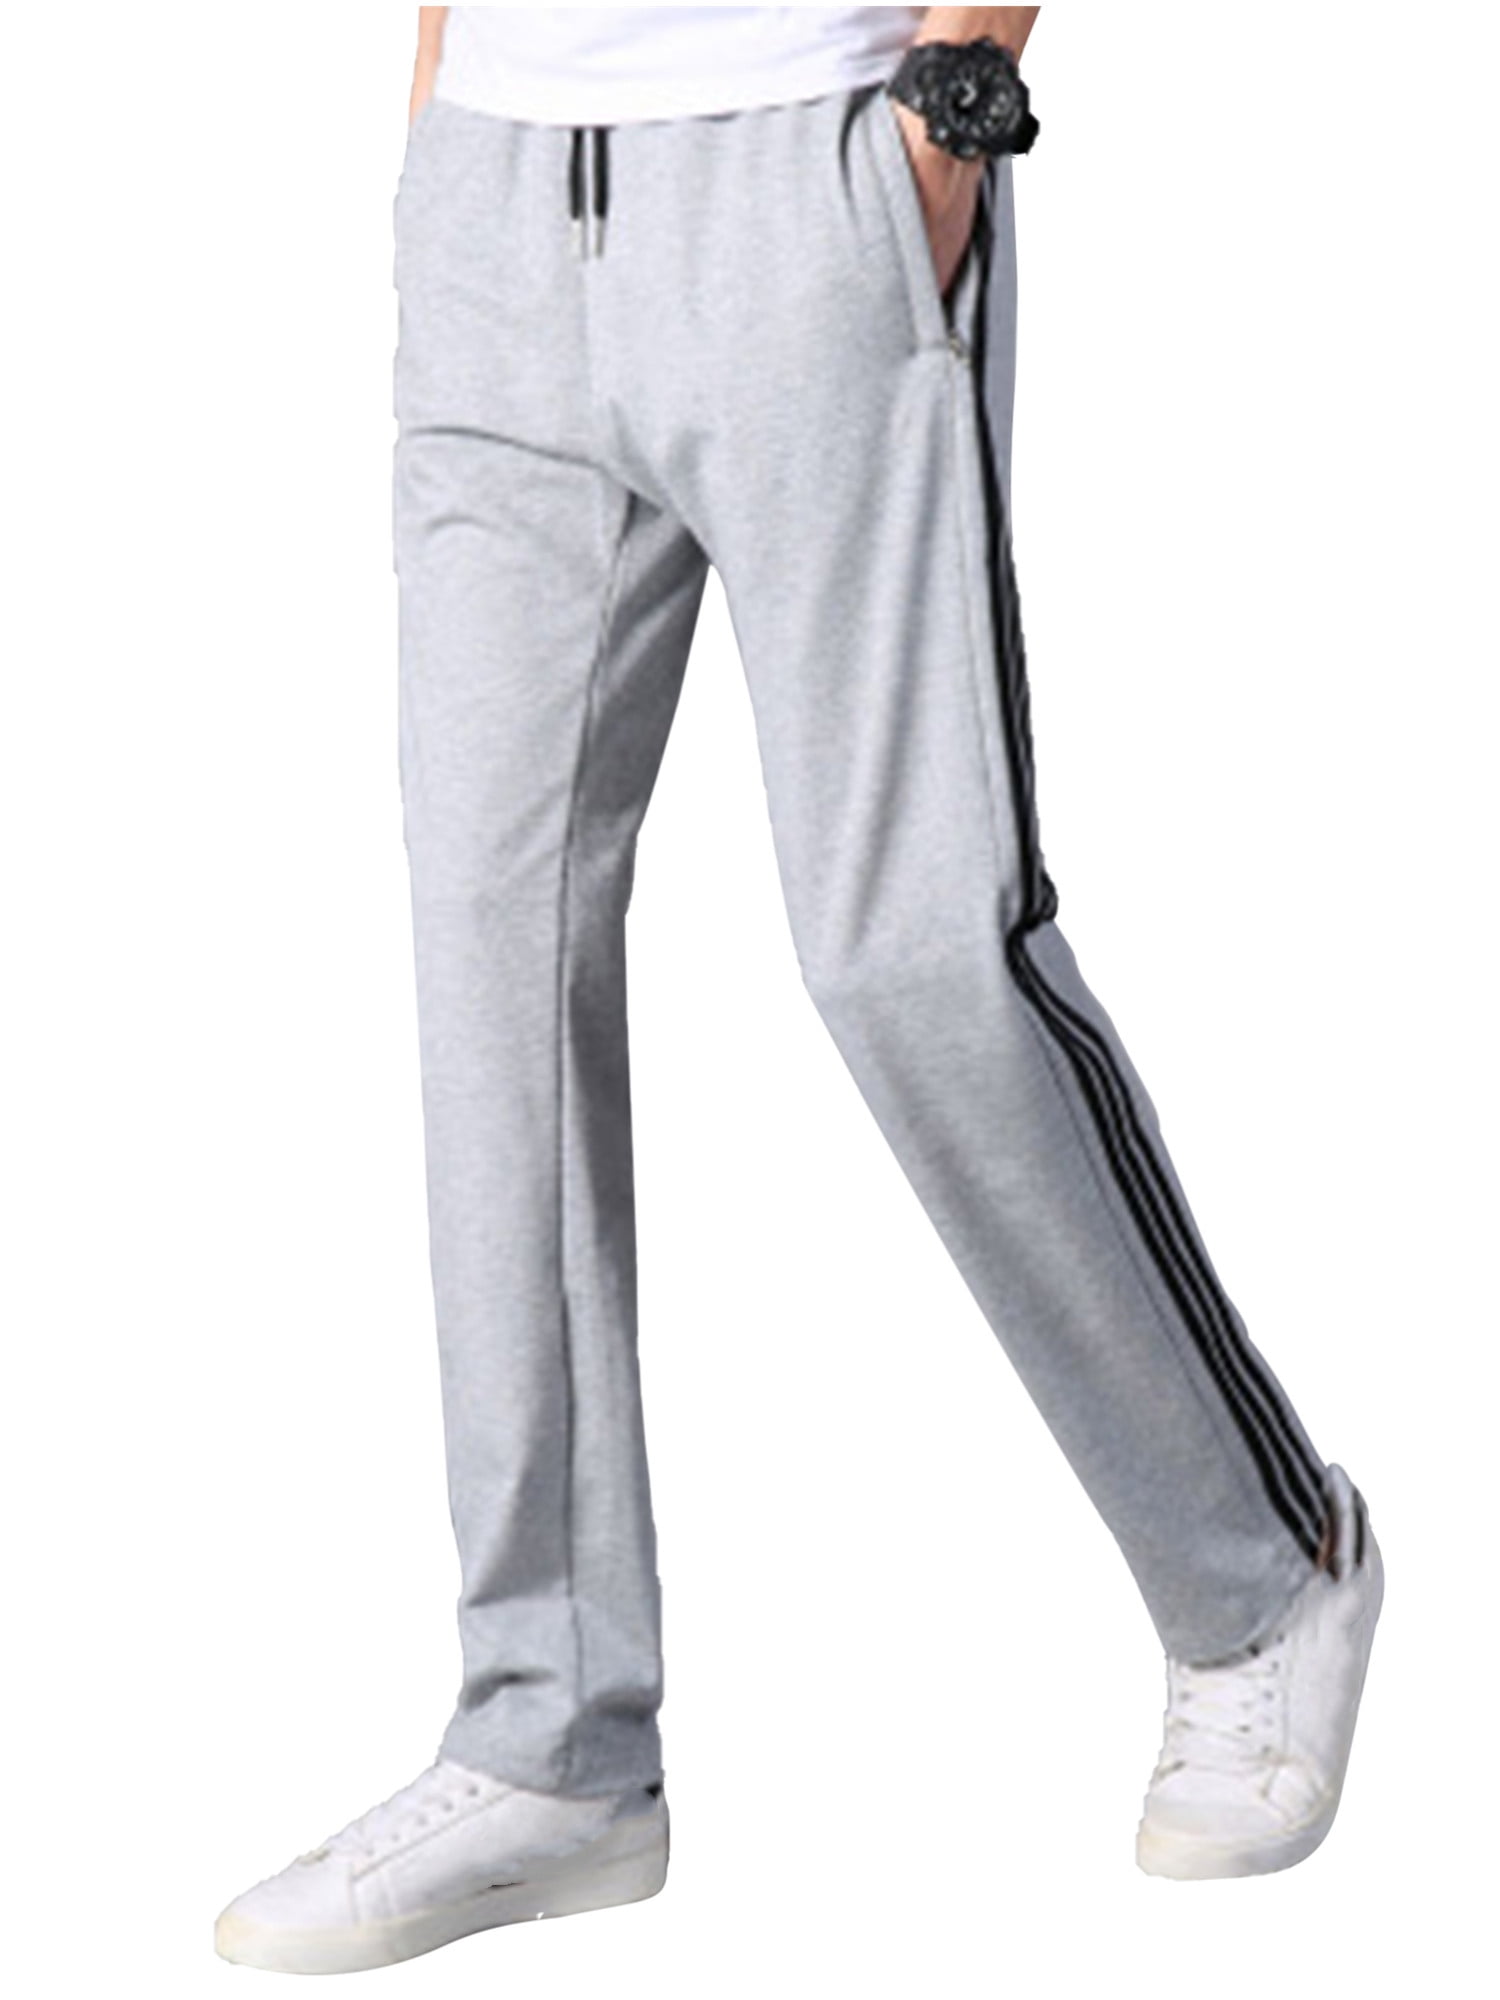 Womens Cotton Joggers Sweatpants White Striped Workout Pants with Pockets 